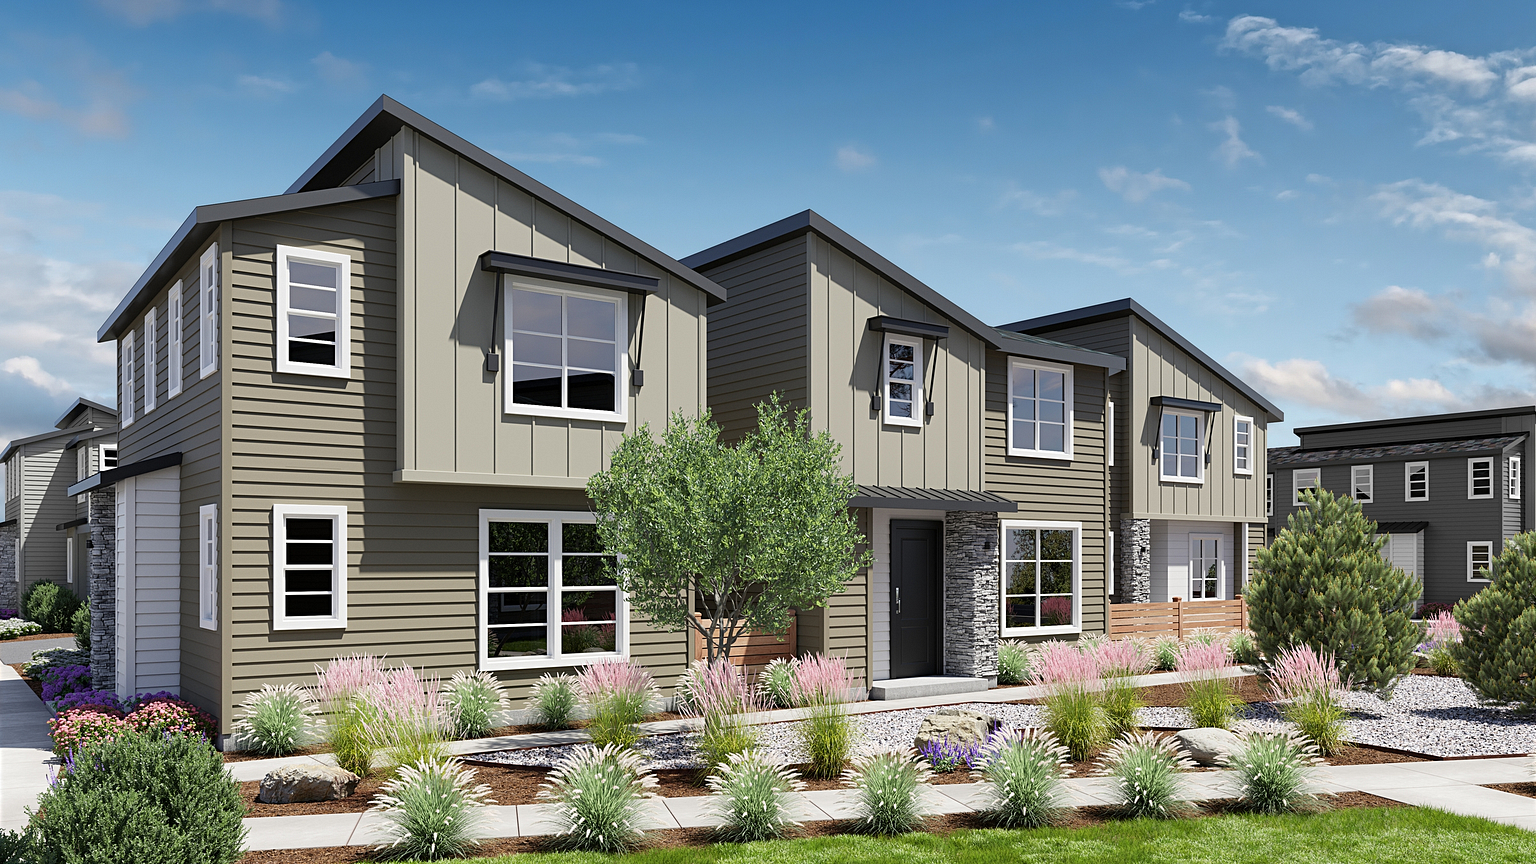 Canvas at Castle Rock townhomes